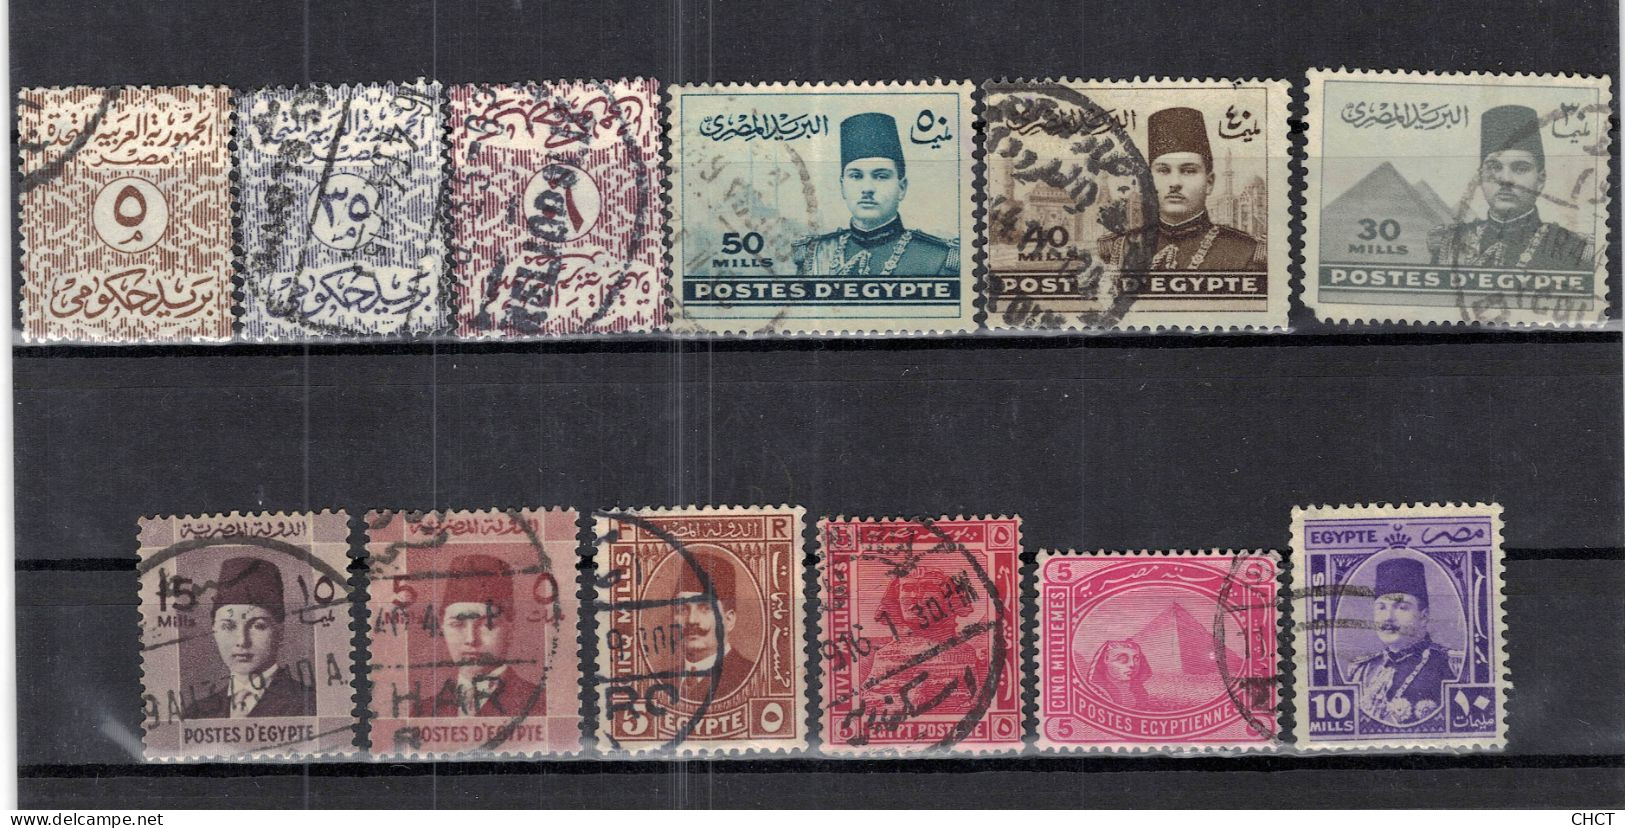 CHCT84 - Lot Of 12 Old Used Stamps Mix, Egypt - Gebraucht